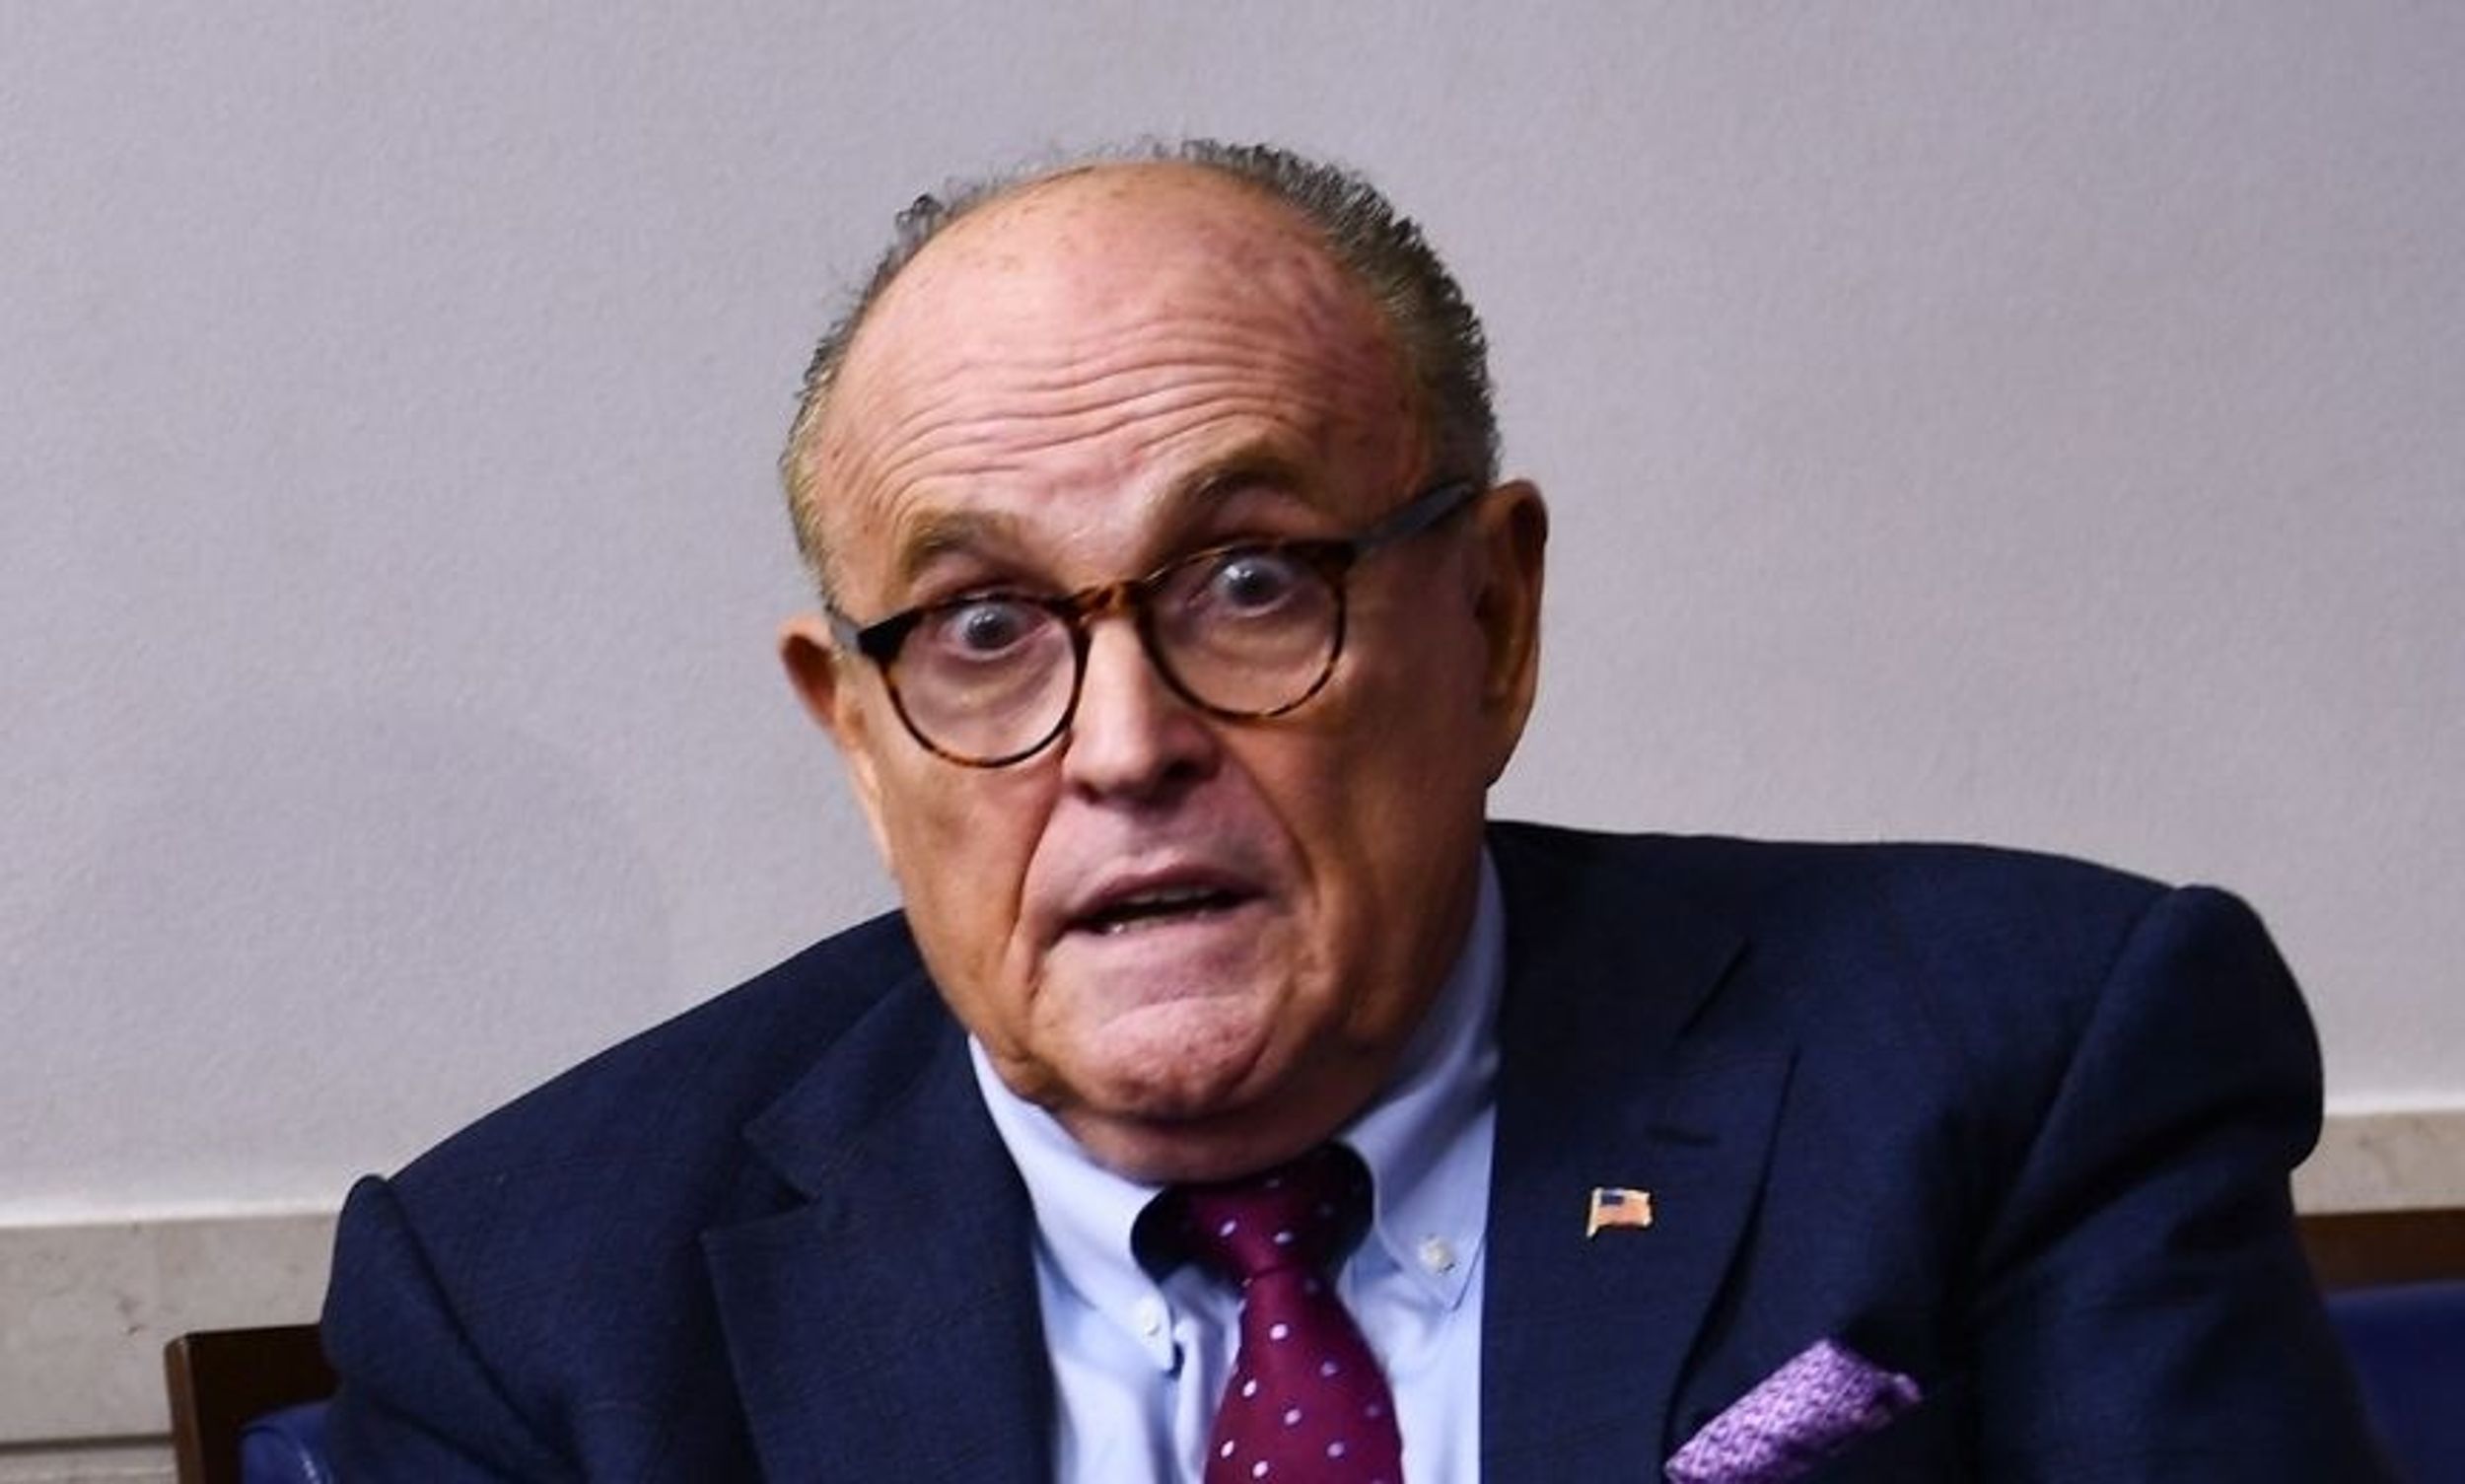 Rudy Giuliani Called Out After He Accidentally Posts Cringeworthy Video Impersonating Asian People to YouTube